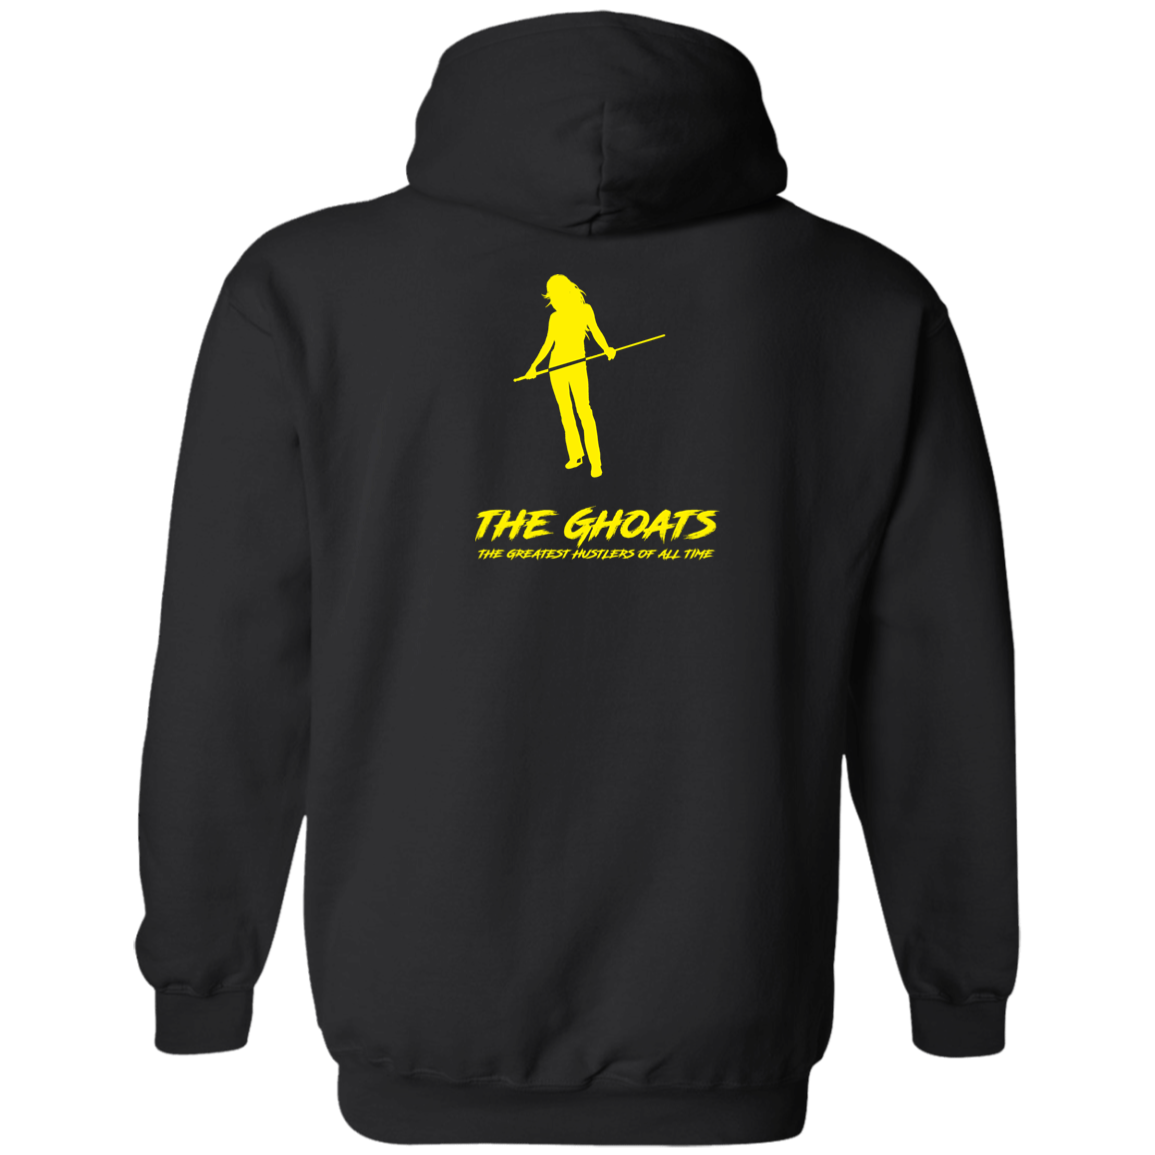 The GHOATS Custom Design. #34 Beware of Sharks. Play at Your Own Risk. (Ladies only version). Basic Pullover Hoodie